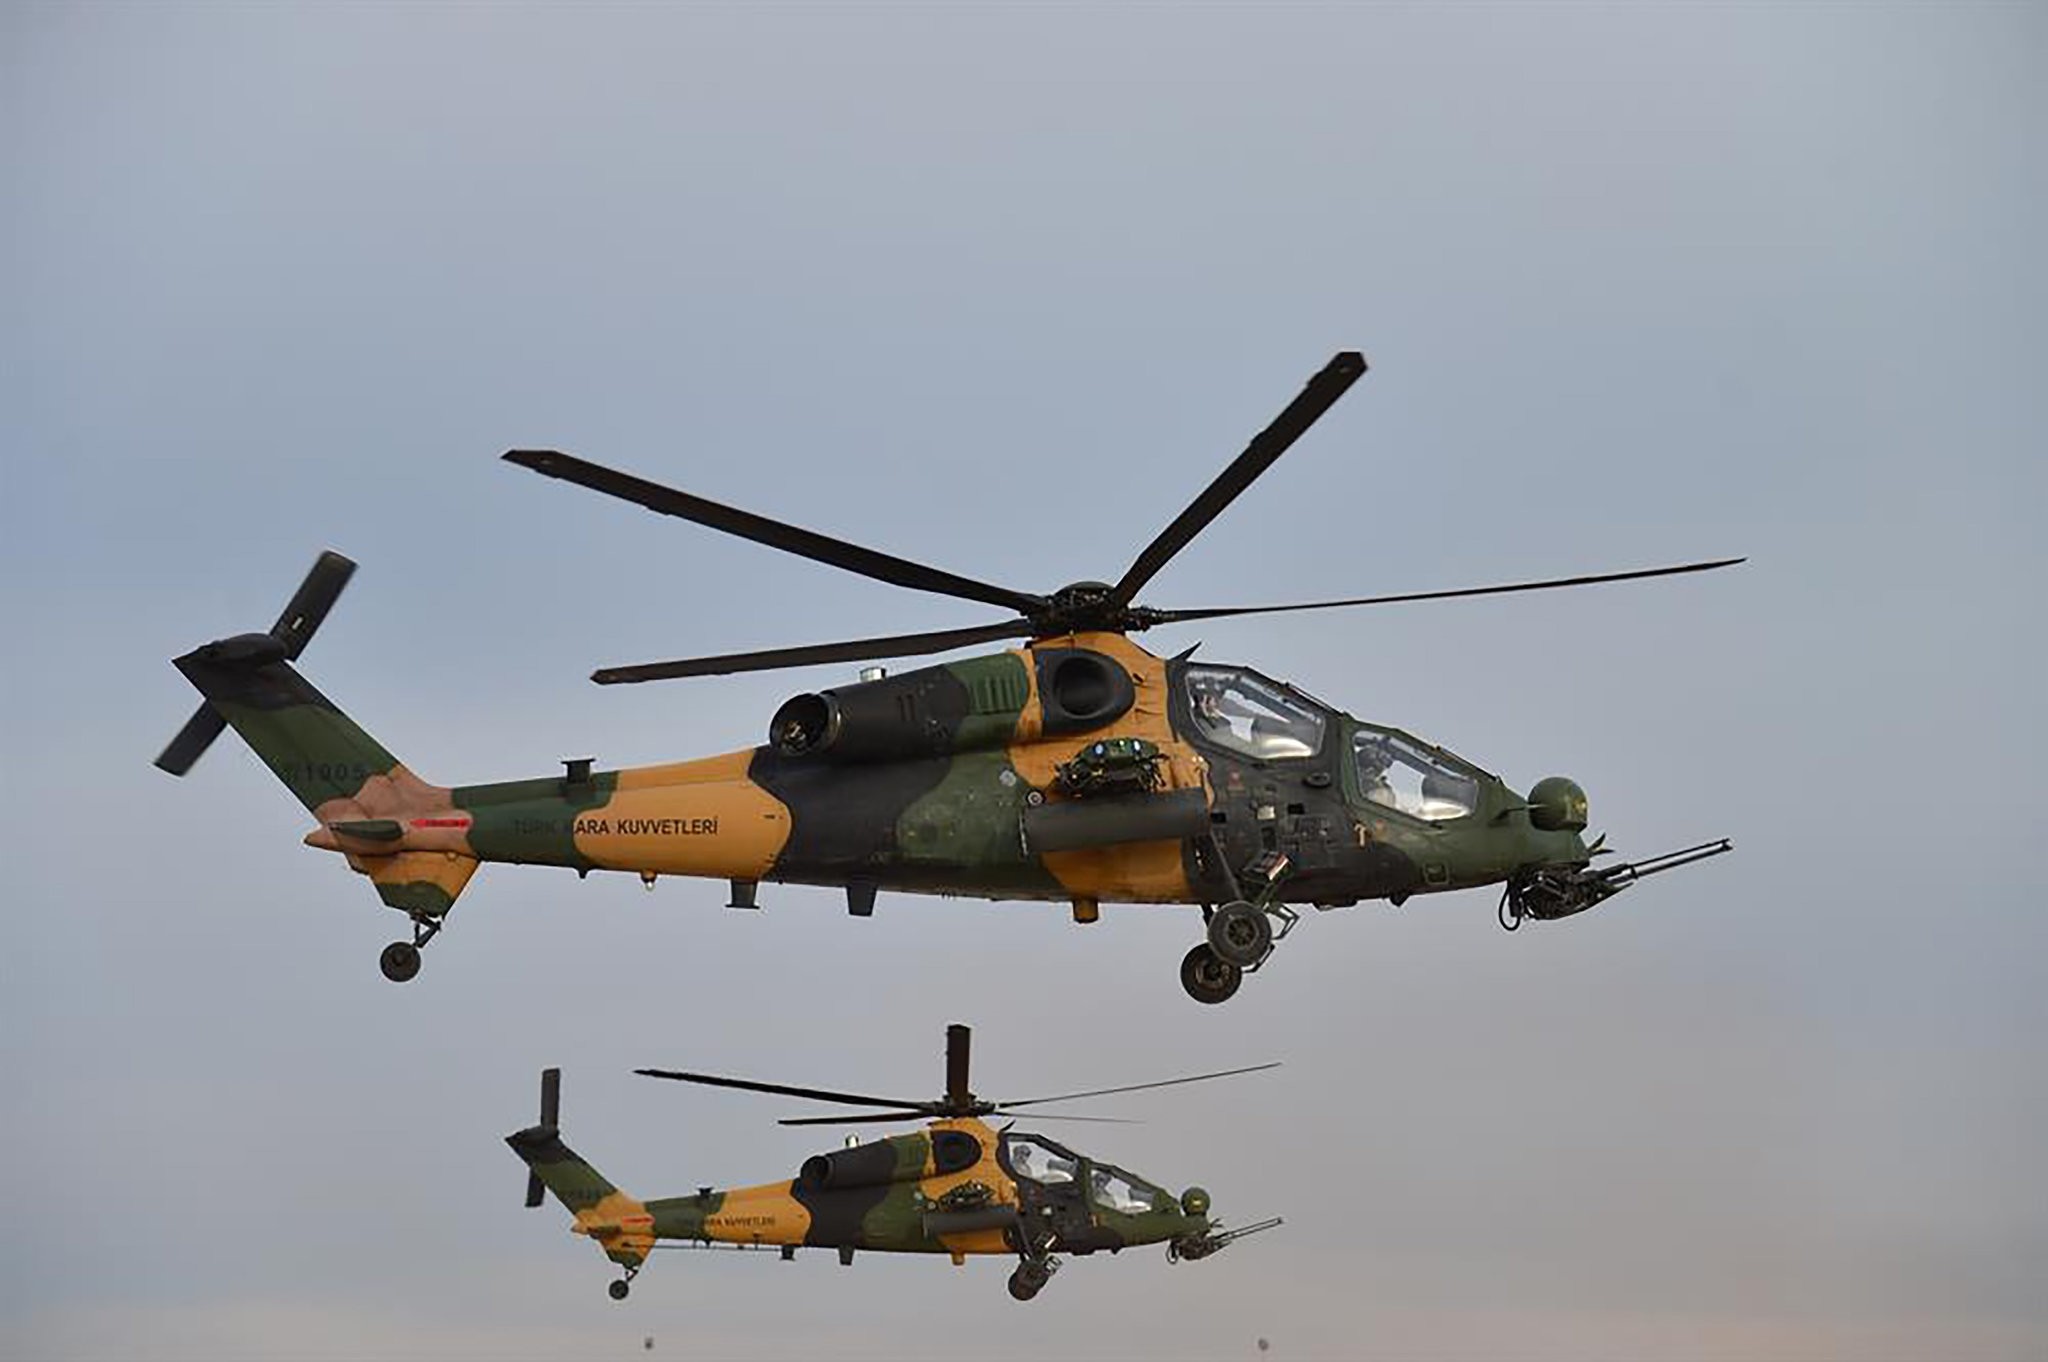 ATAK helicopters, one of the most remarkable products of Turkeyu2019s defense industry, have paved the way for increased exports.